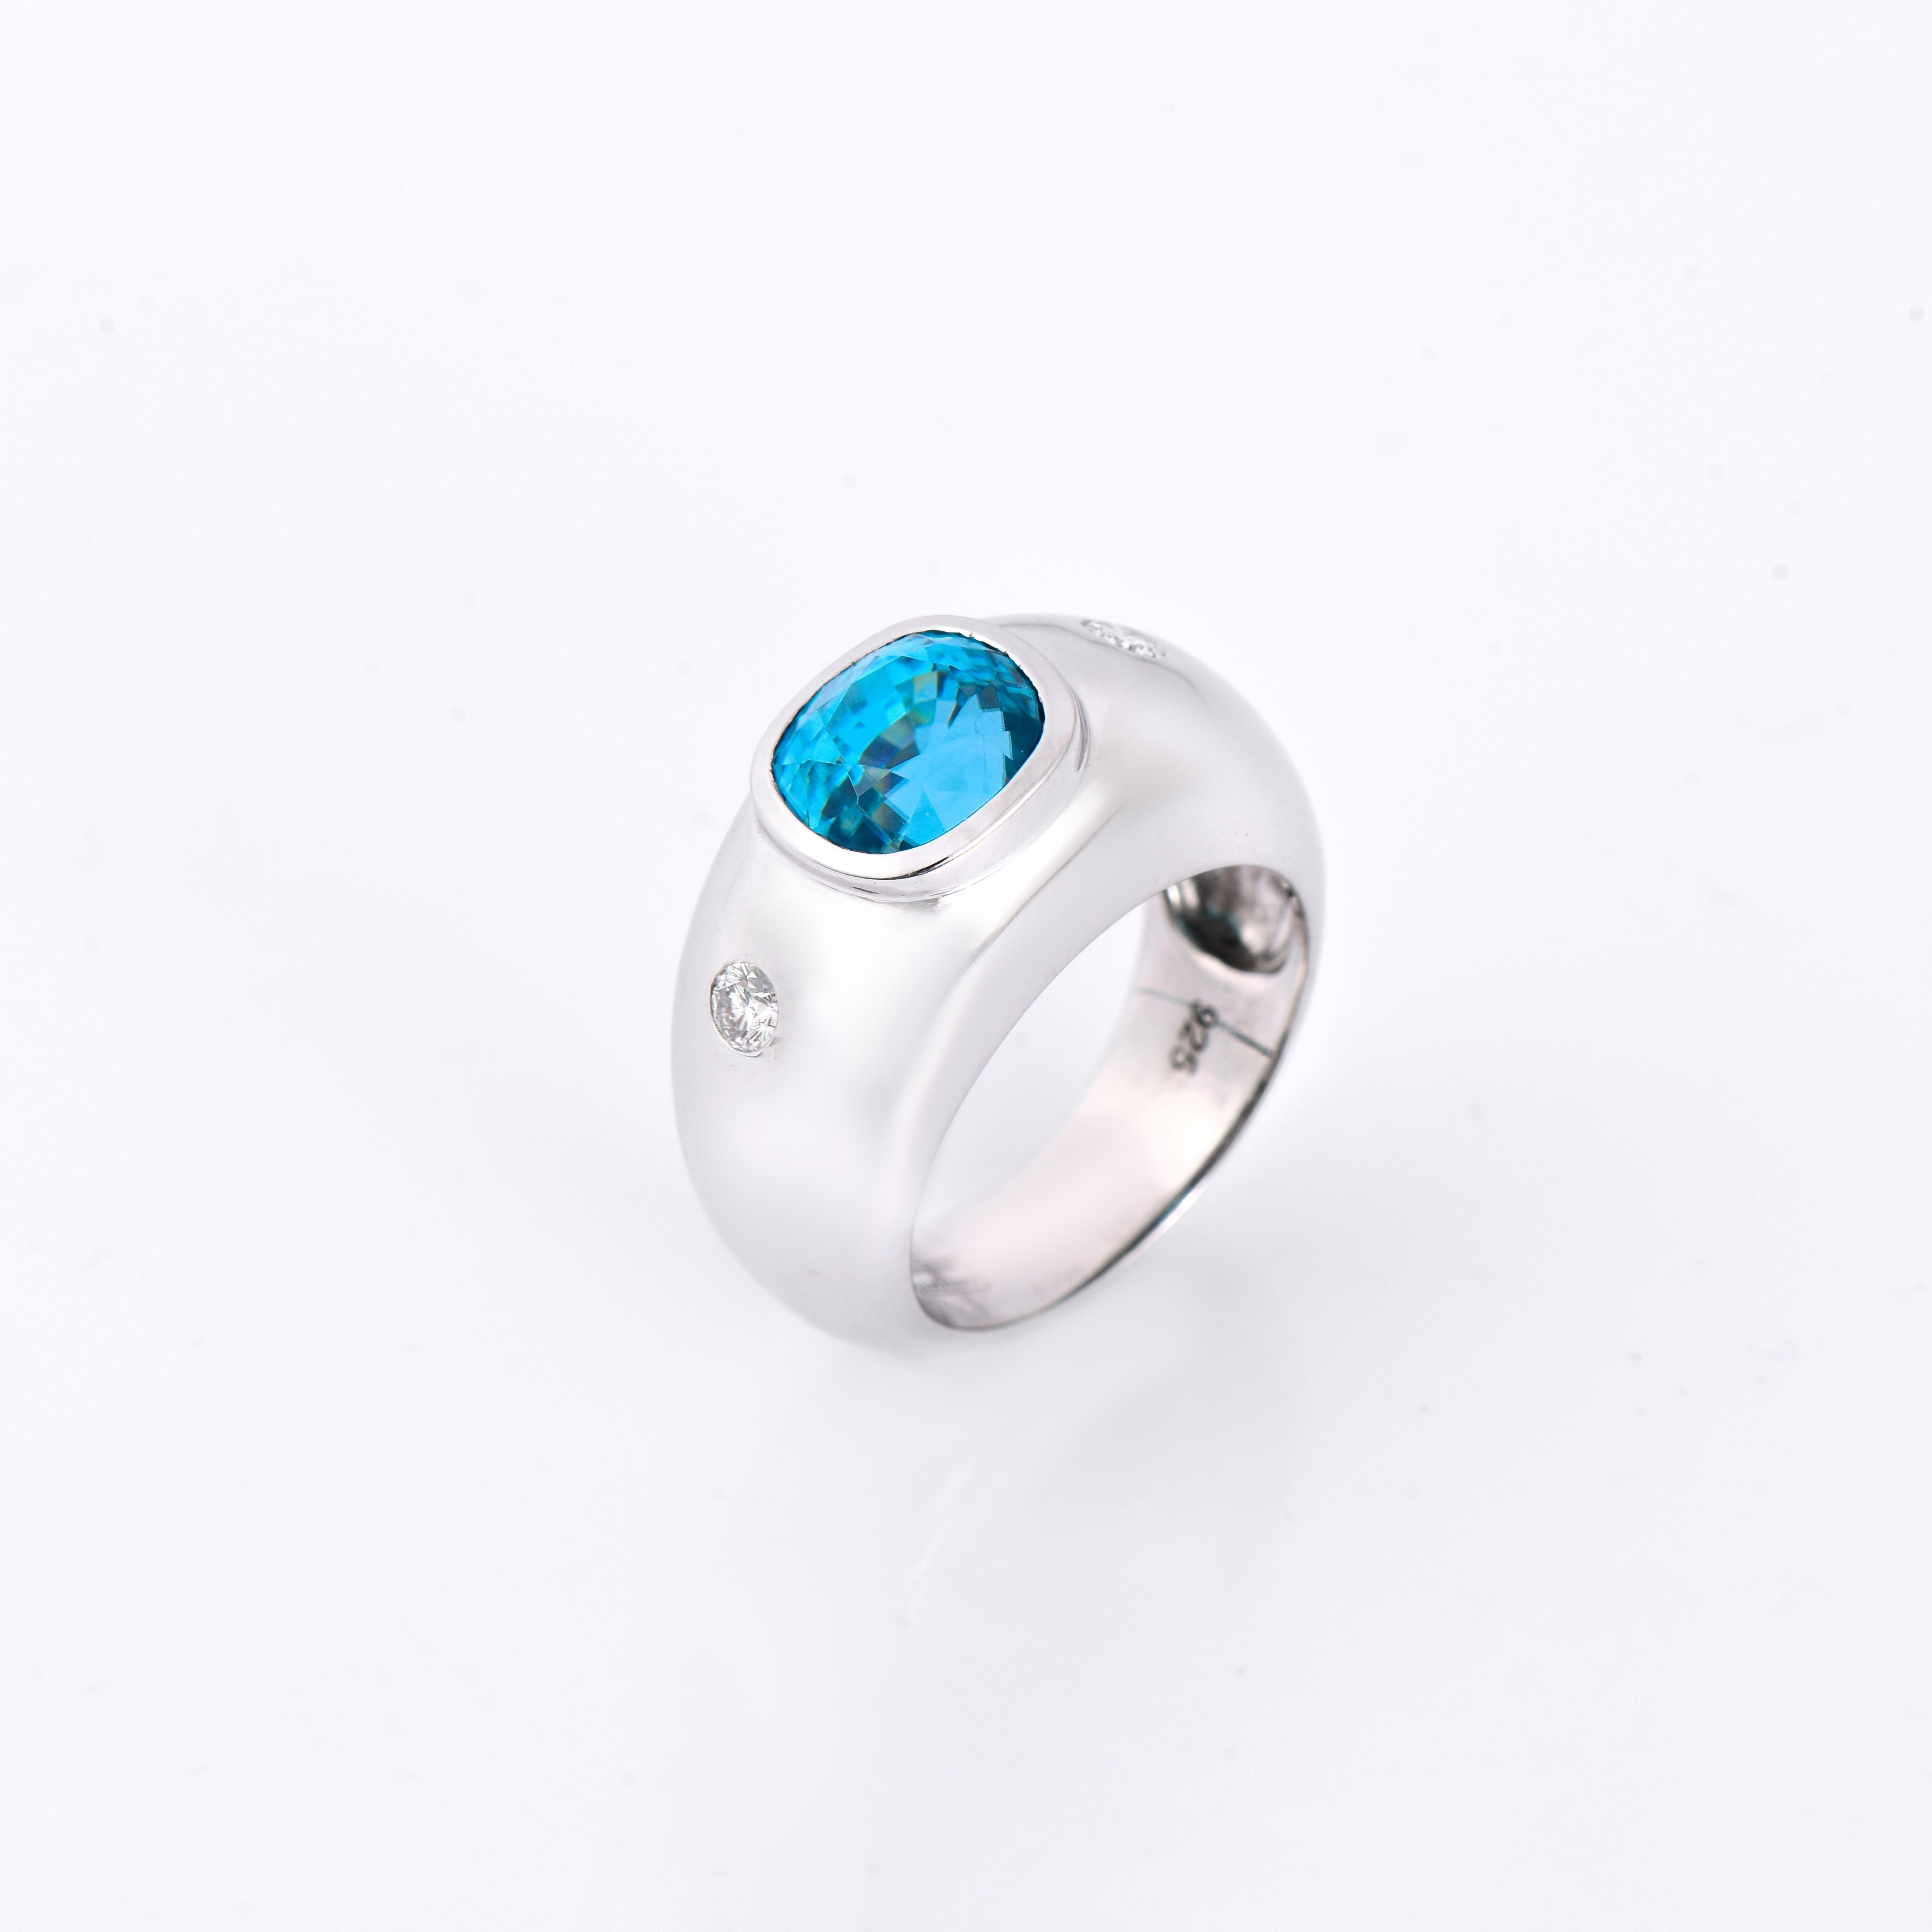 Orloff of Denmark; 925 Sterling Silver Ring set with a 7.2 carat Natural Cambodian Blue Zircon and two Natural White Diamonds.

This 925 Sterling Silver ring presents a harmonious blend of classic charm and modern design. Its smooth, rounded band is